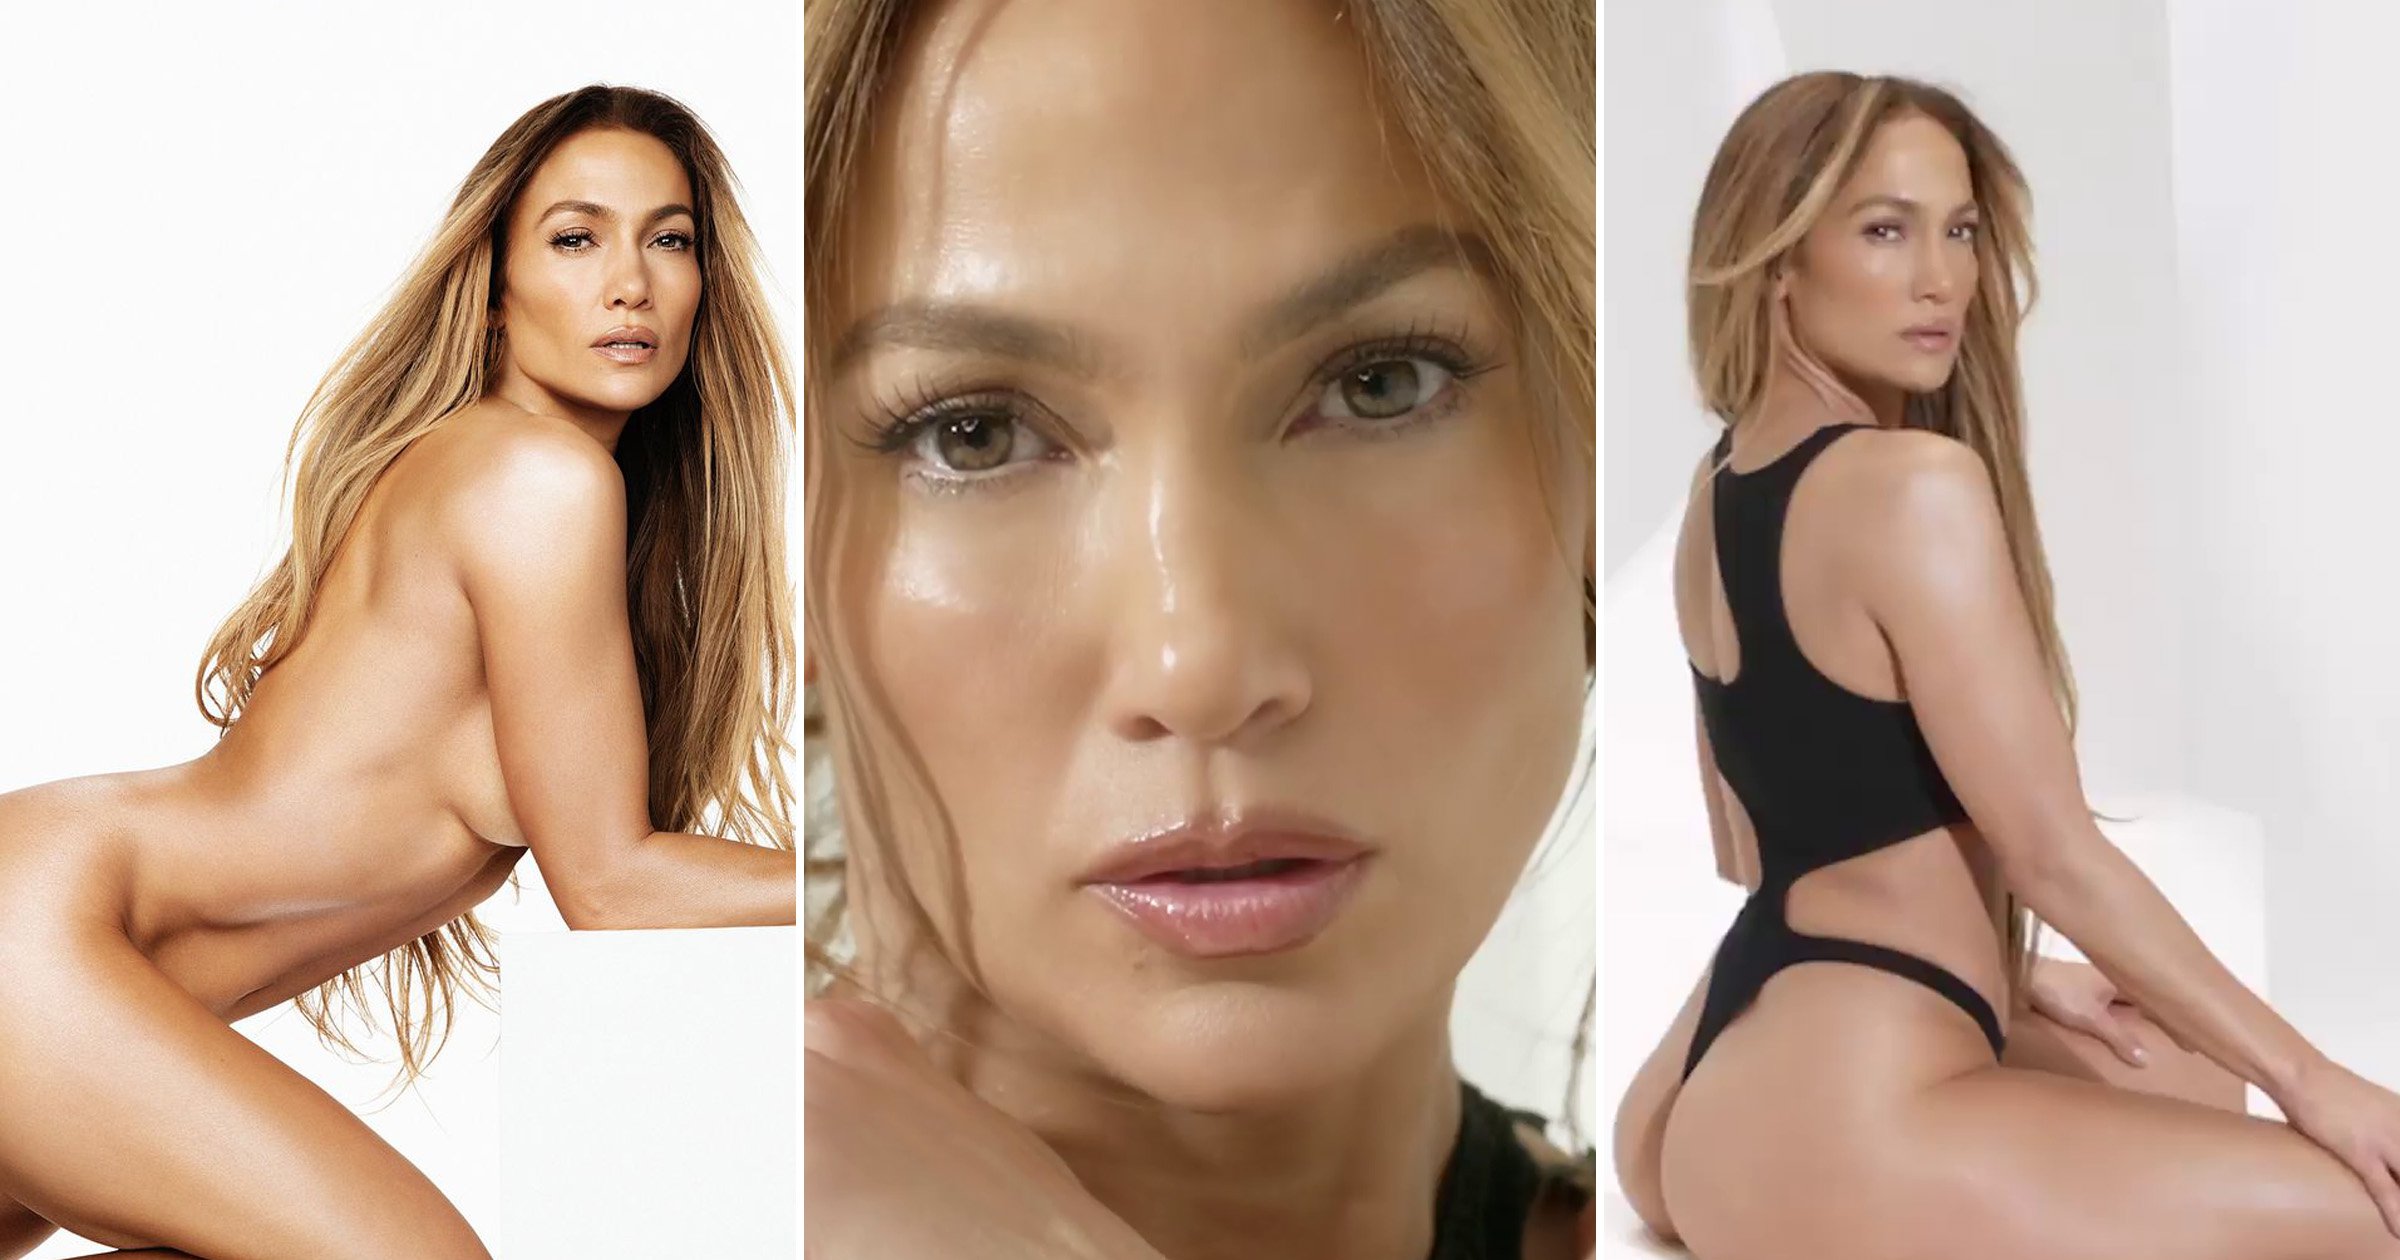 ben silber recommends nude jennifer lopez pics pic